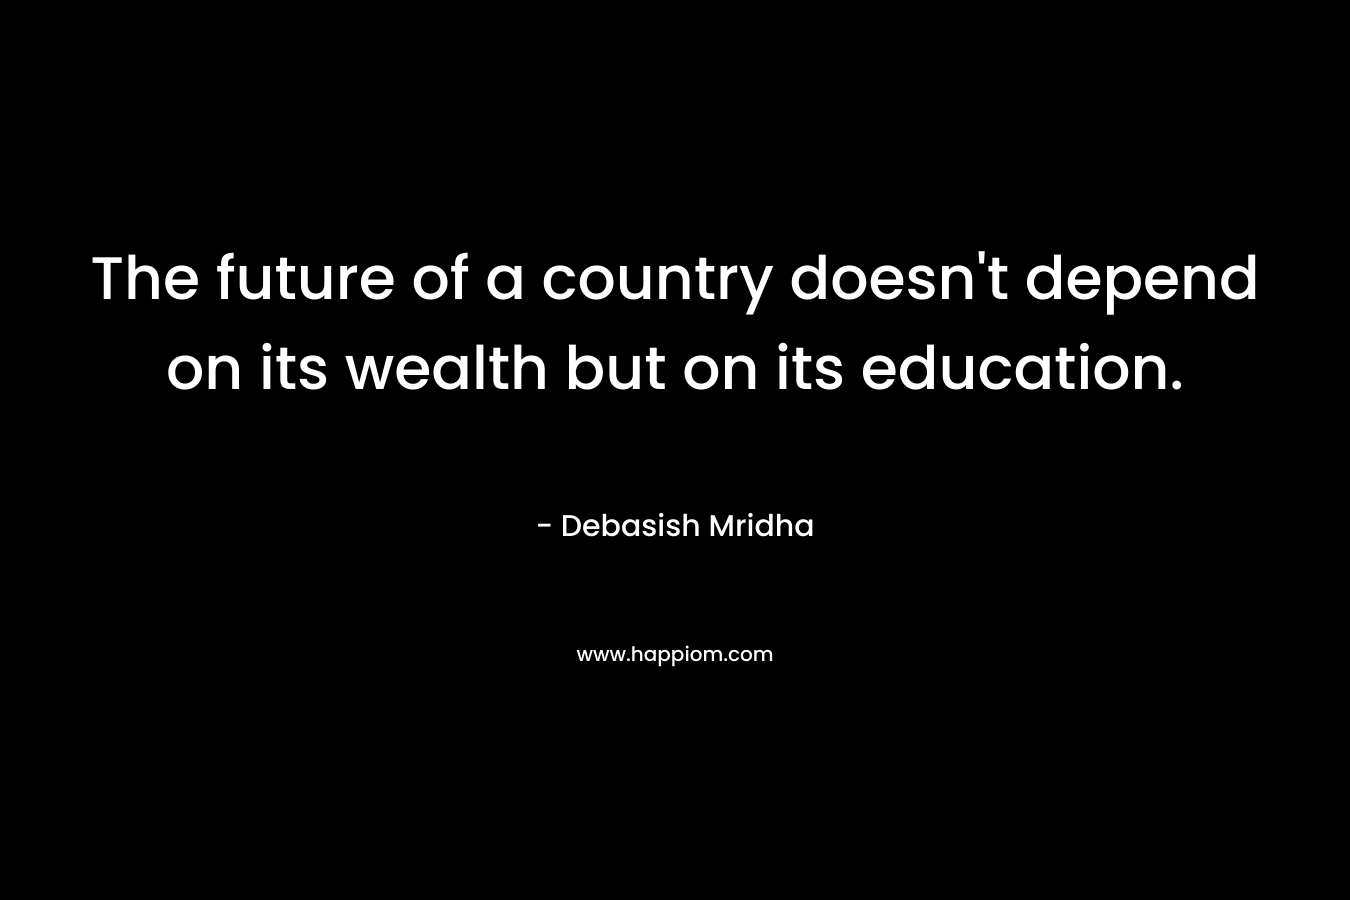 The future of a country doesn't depend on its wealth but on its education.